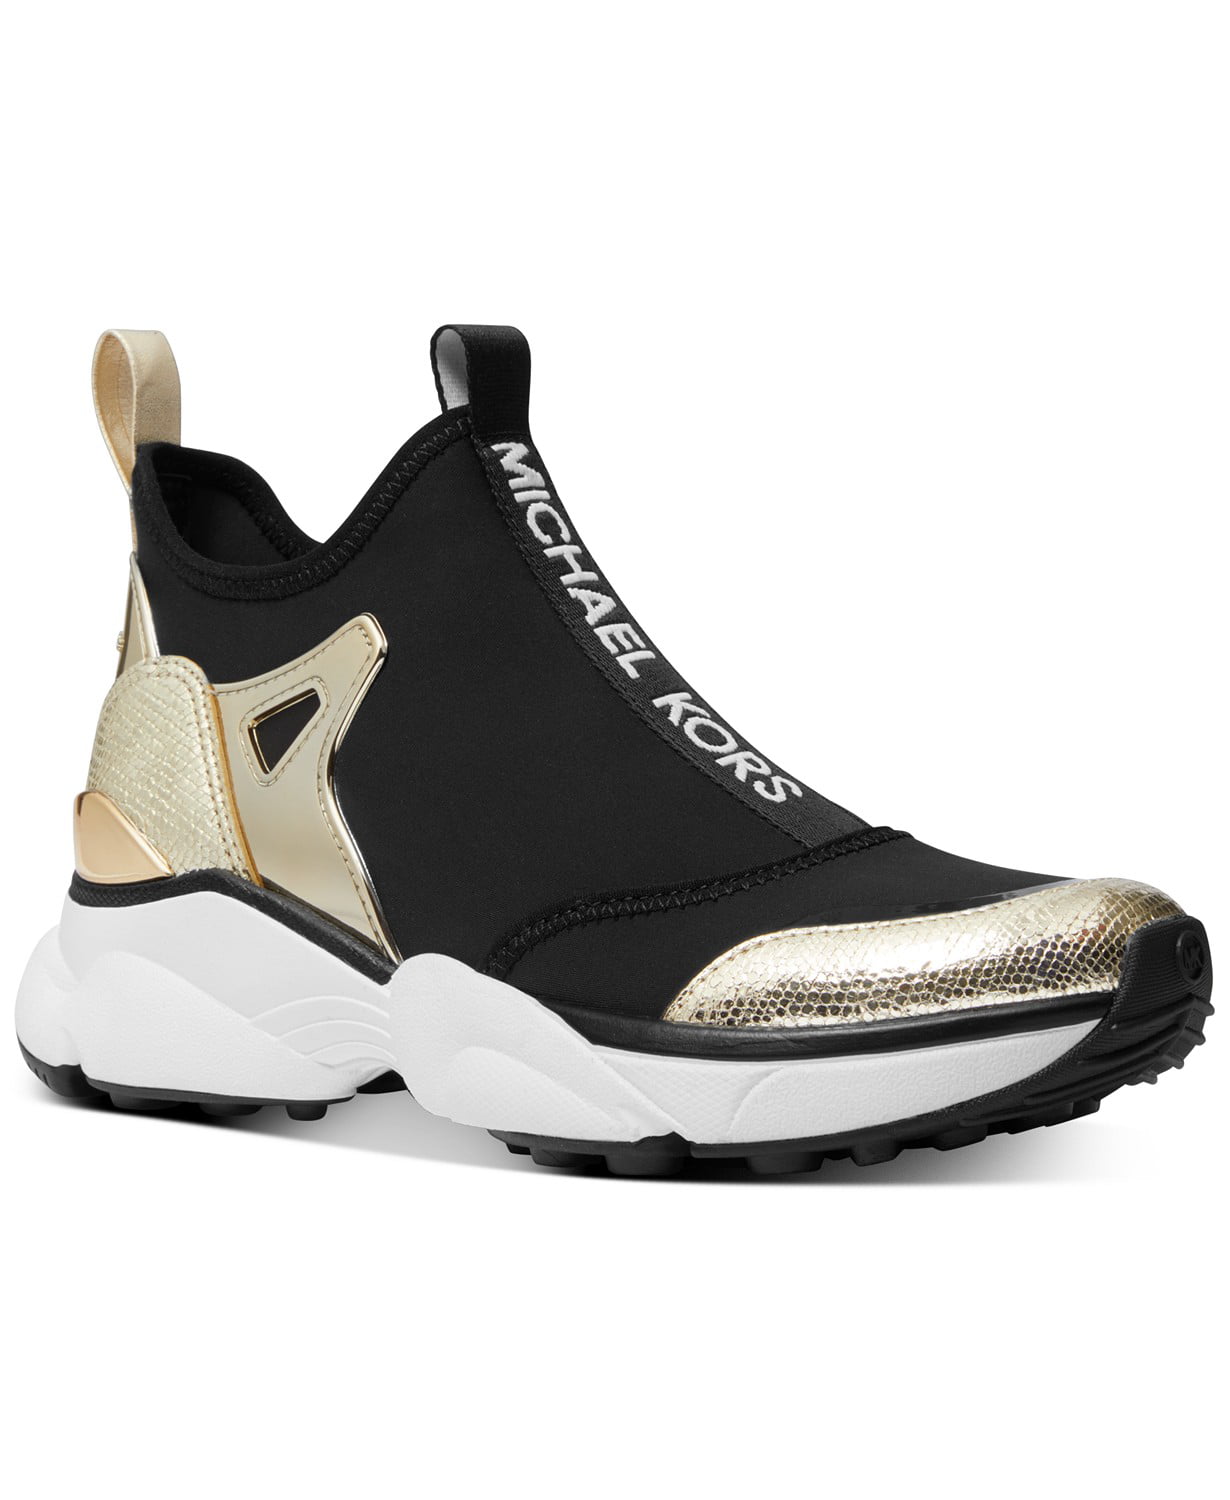 gold slip on trainers